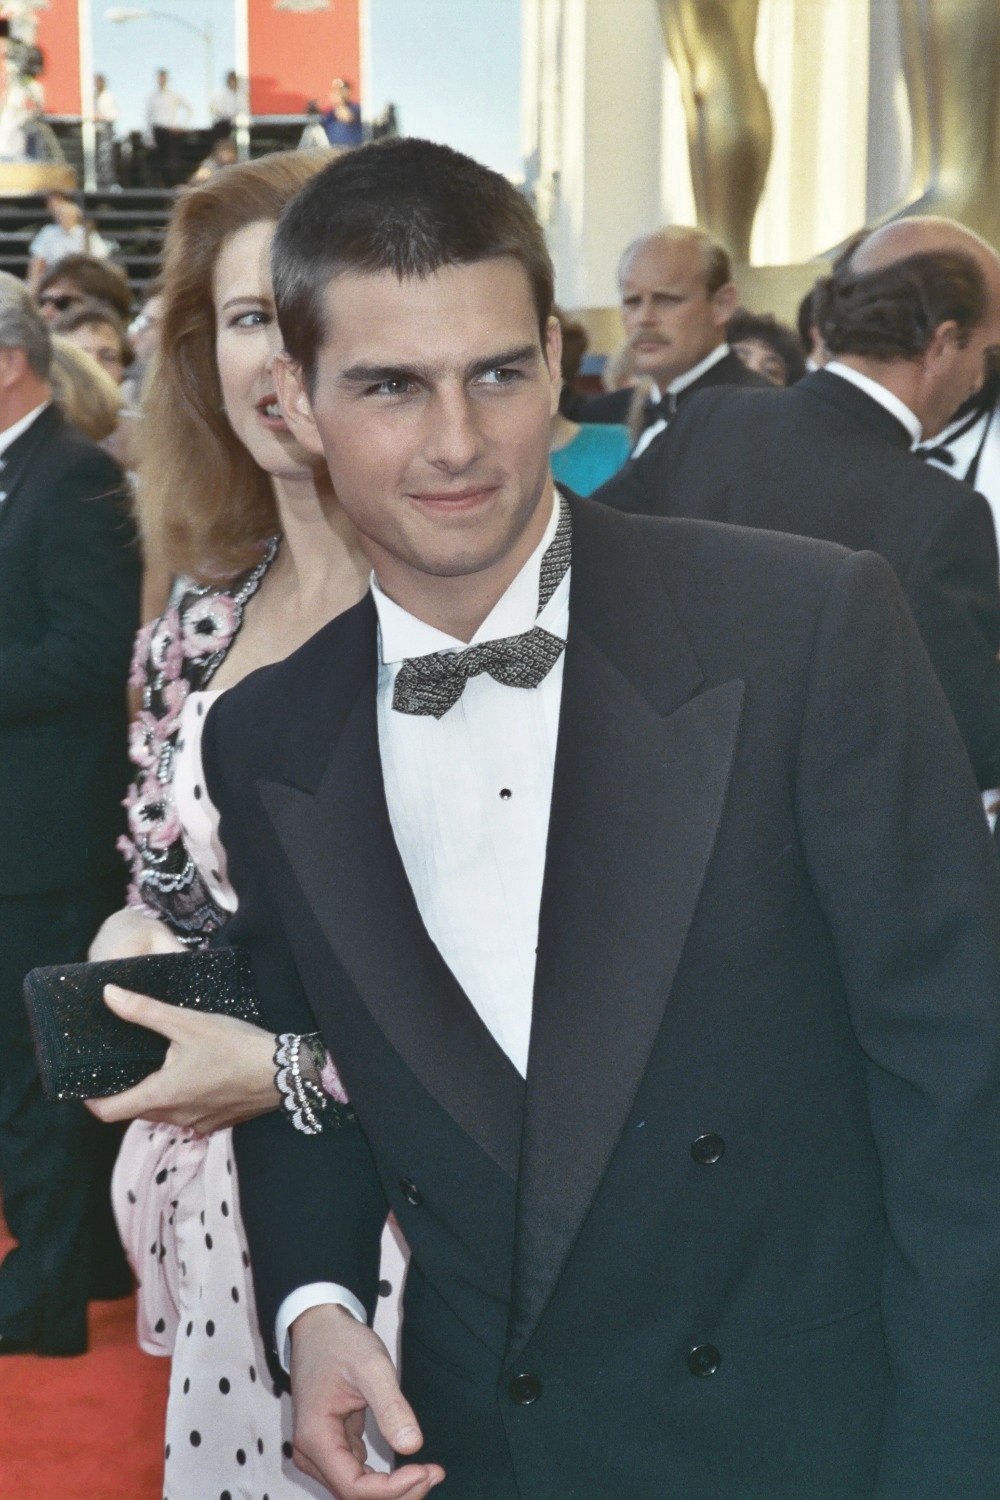 man in suit and bow tie standing on red carpet